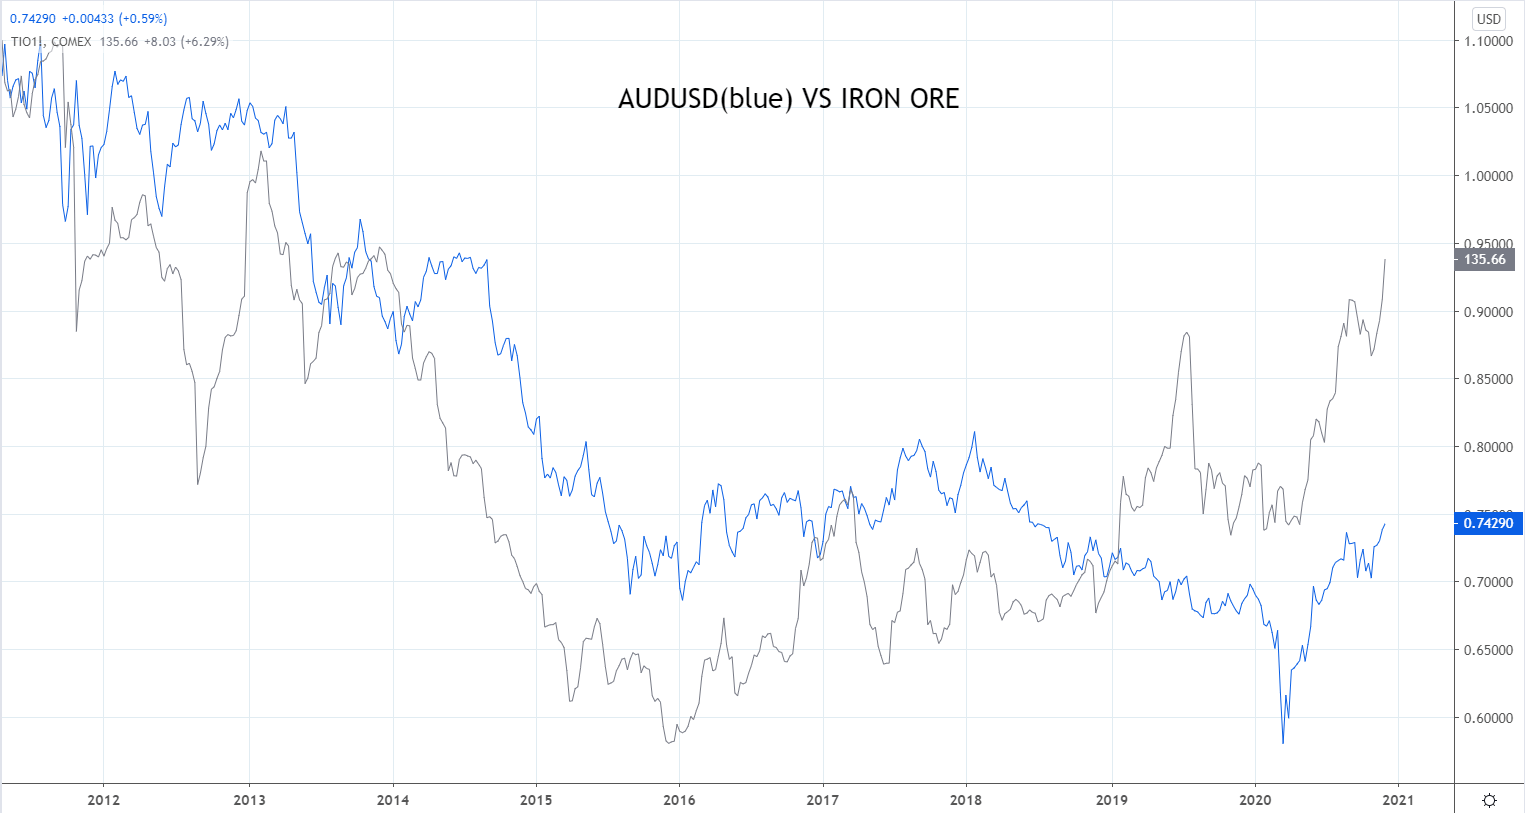 All about the base - AUDUSD